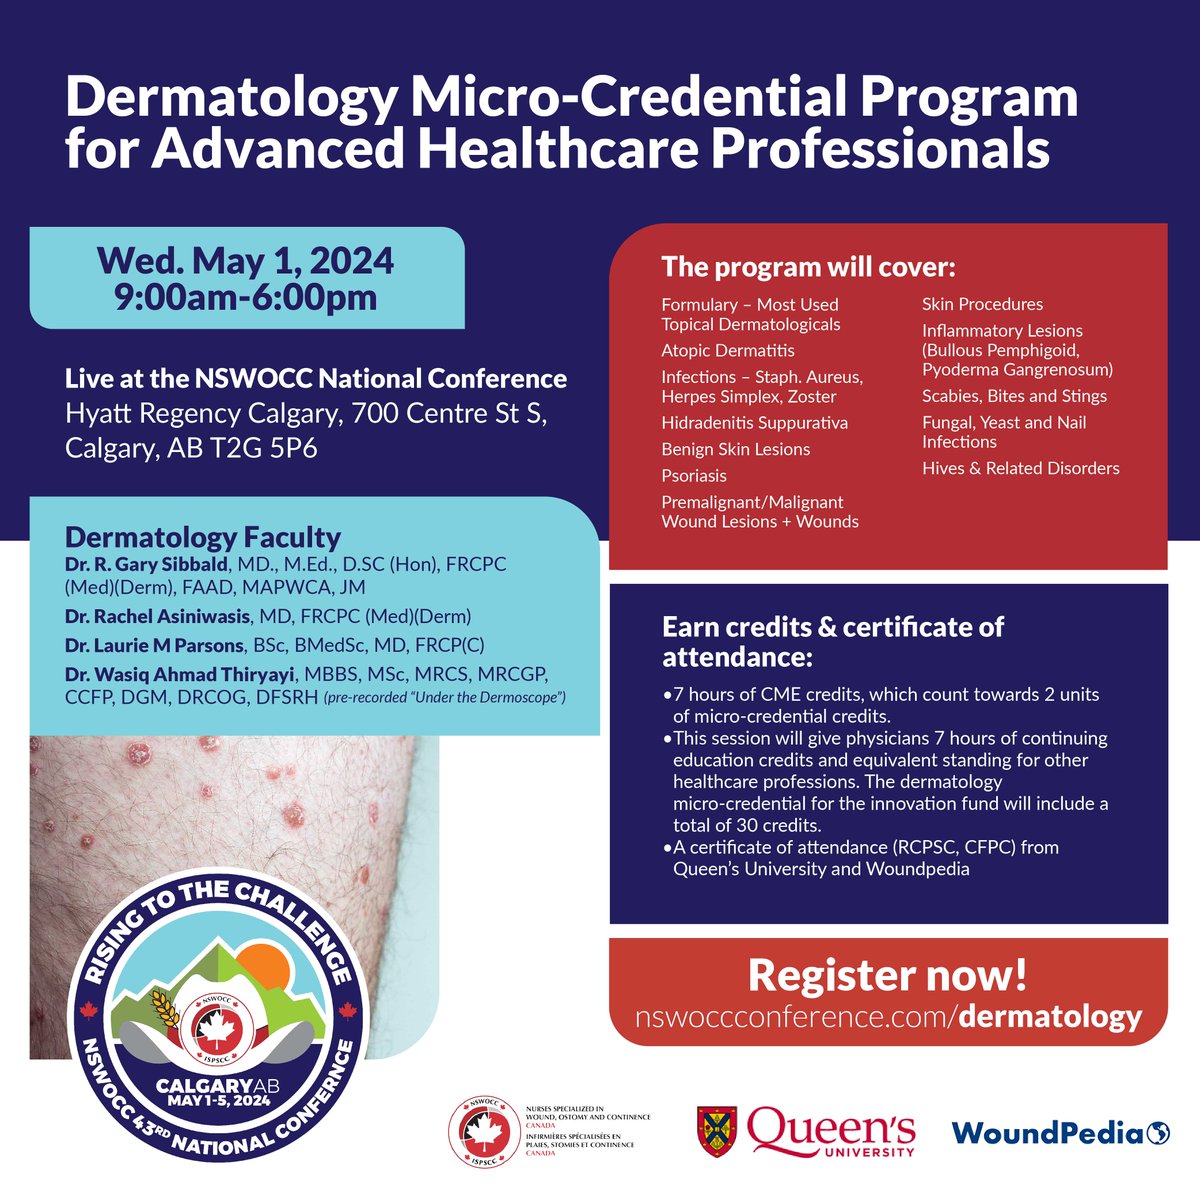 Join us for an exclusive one-day #Dermatology Program for Advanced Healthcare Professionals! Enhance your skills in diagnosing & treating dermatological conditions. 🗓 Wed, May 1, 2024 ⏰ 9:00AM - 6:00PM 📍 Hyatt Regency Calgary 🔗 Learn more & register: nswoccconference.com/dermatology